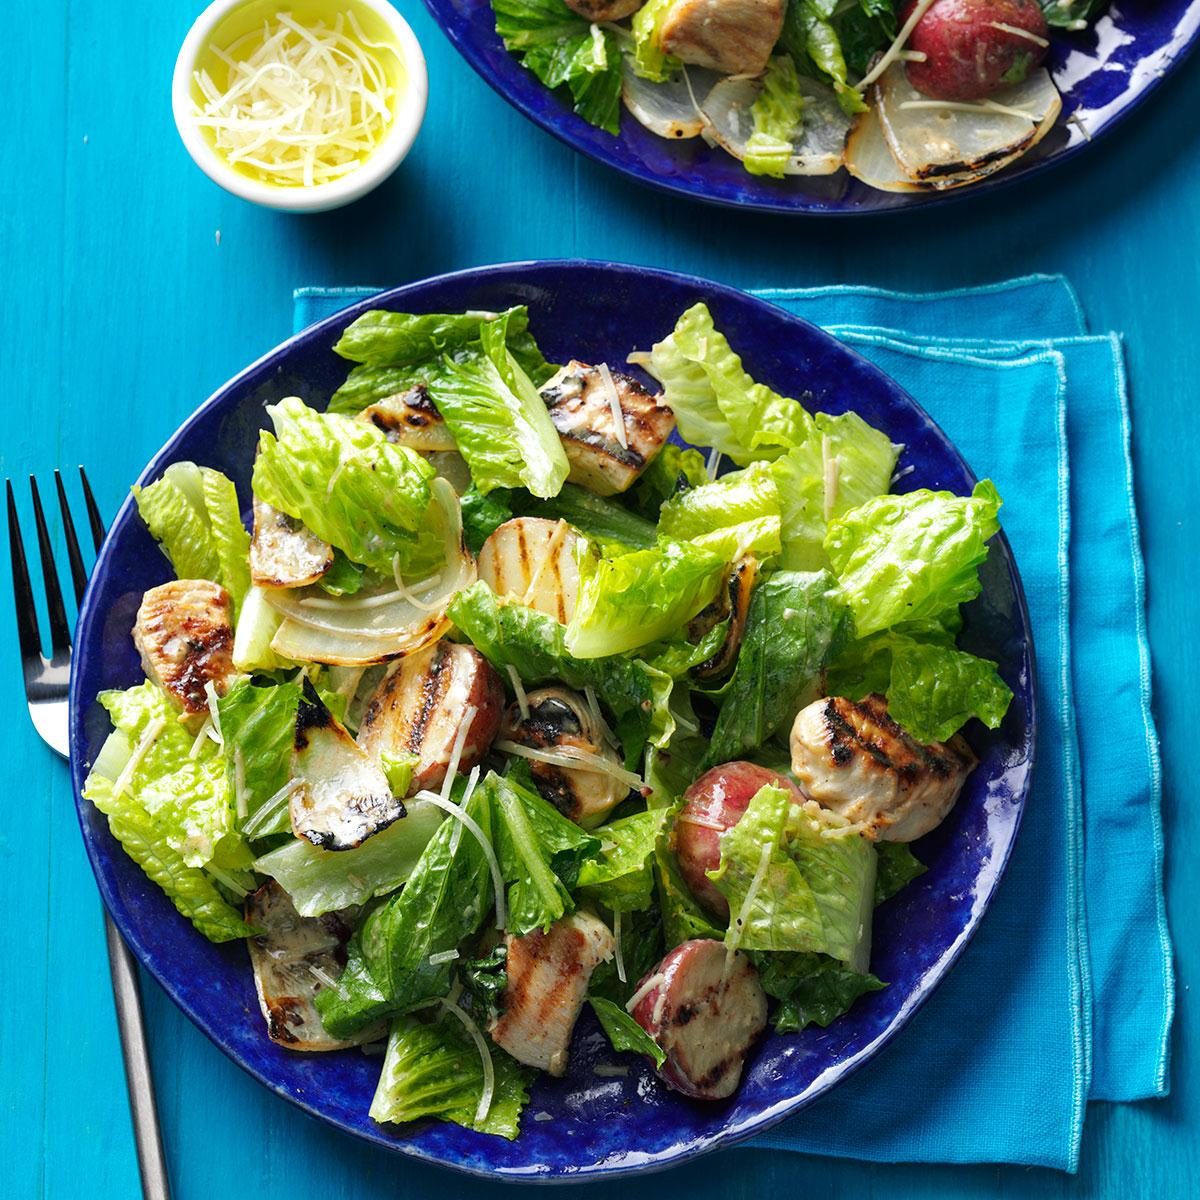 <p>My Caesar with grilled chicken is a healthier alternative to heavy meat and potatoes dishes. After grilling the kabobs, we serve them family style. —Melissa Adams, Tooele, Utah </p> <div class="listicle-page__buttons"> <div class="listicle-page__cta-button"><a href='https://www.tasteofhome.com/recipes/chicken-onion-caesar-salad/'>Go to Recipe</a></div> </div>